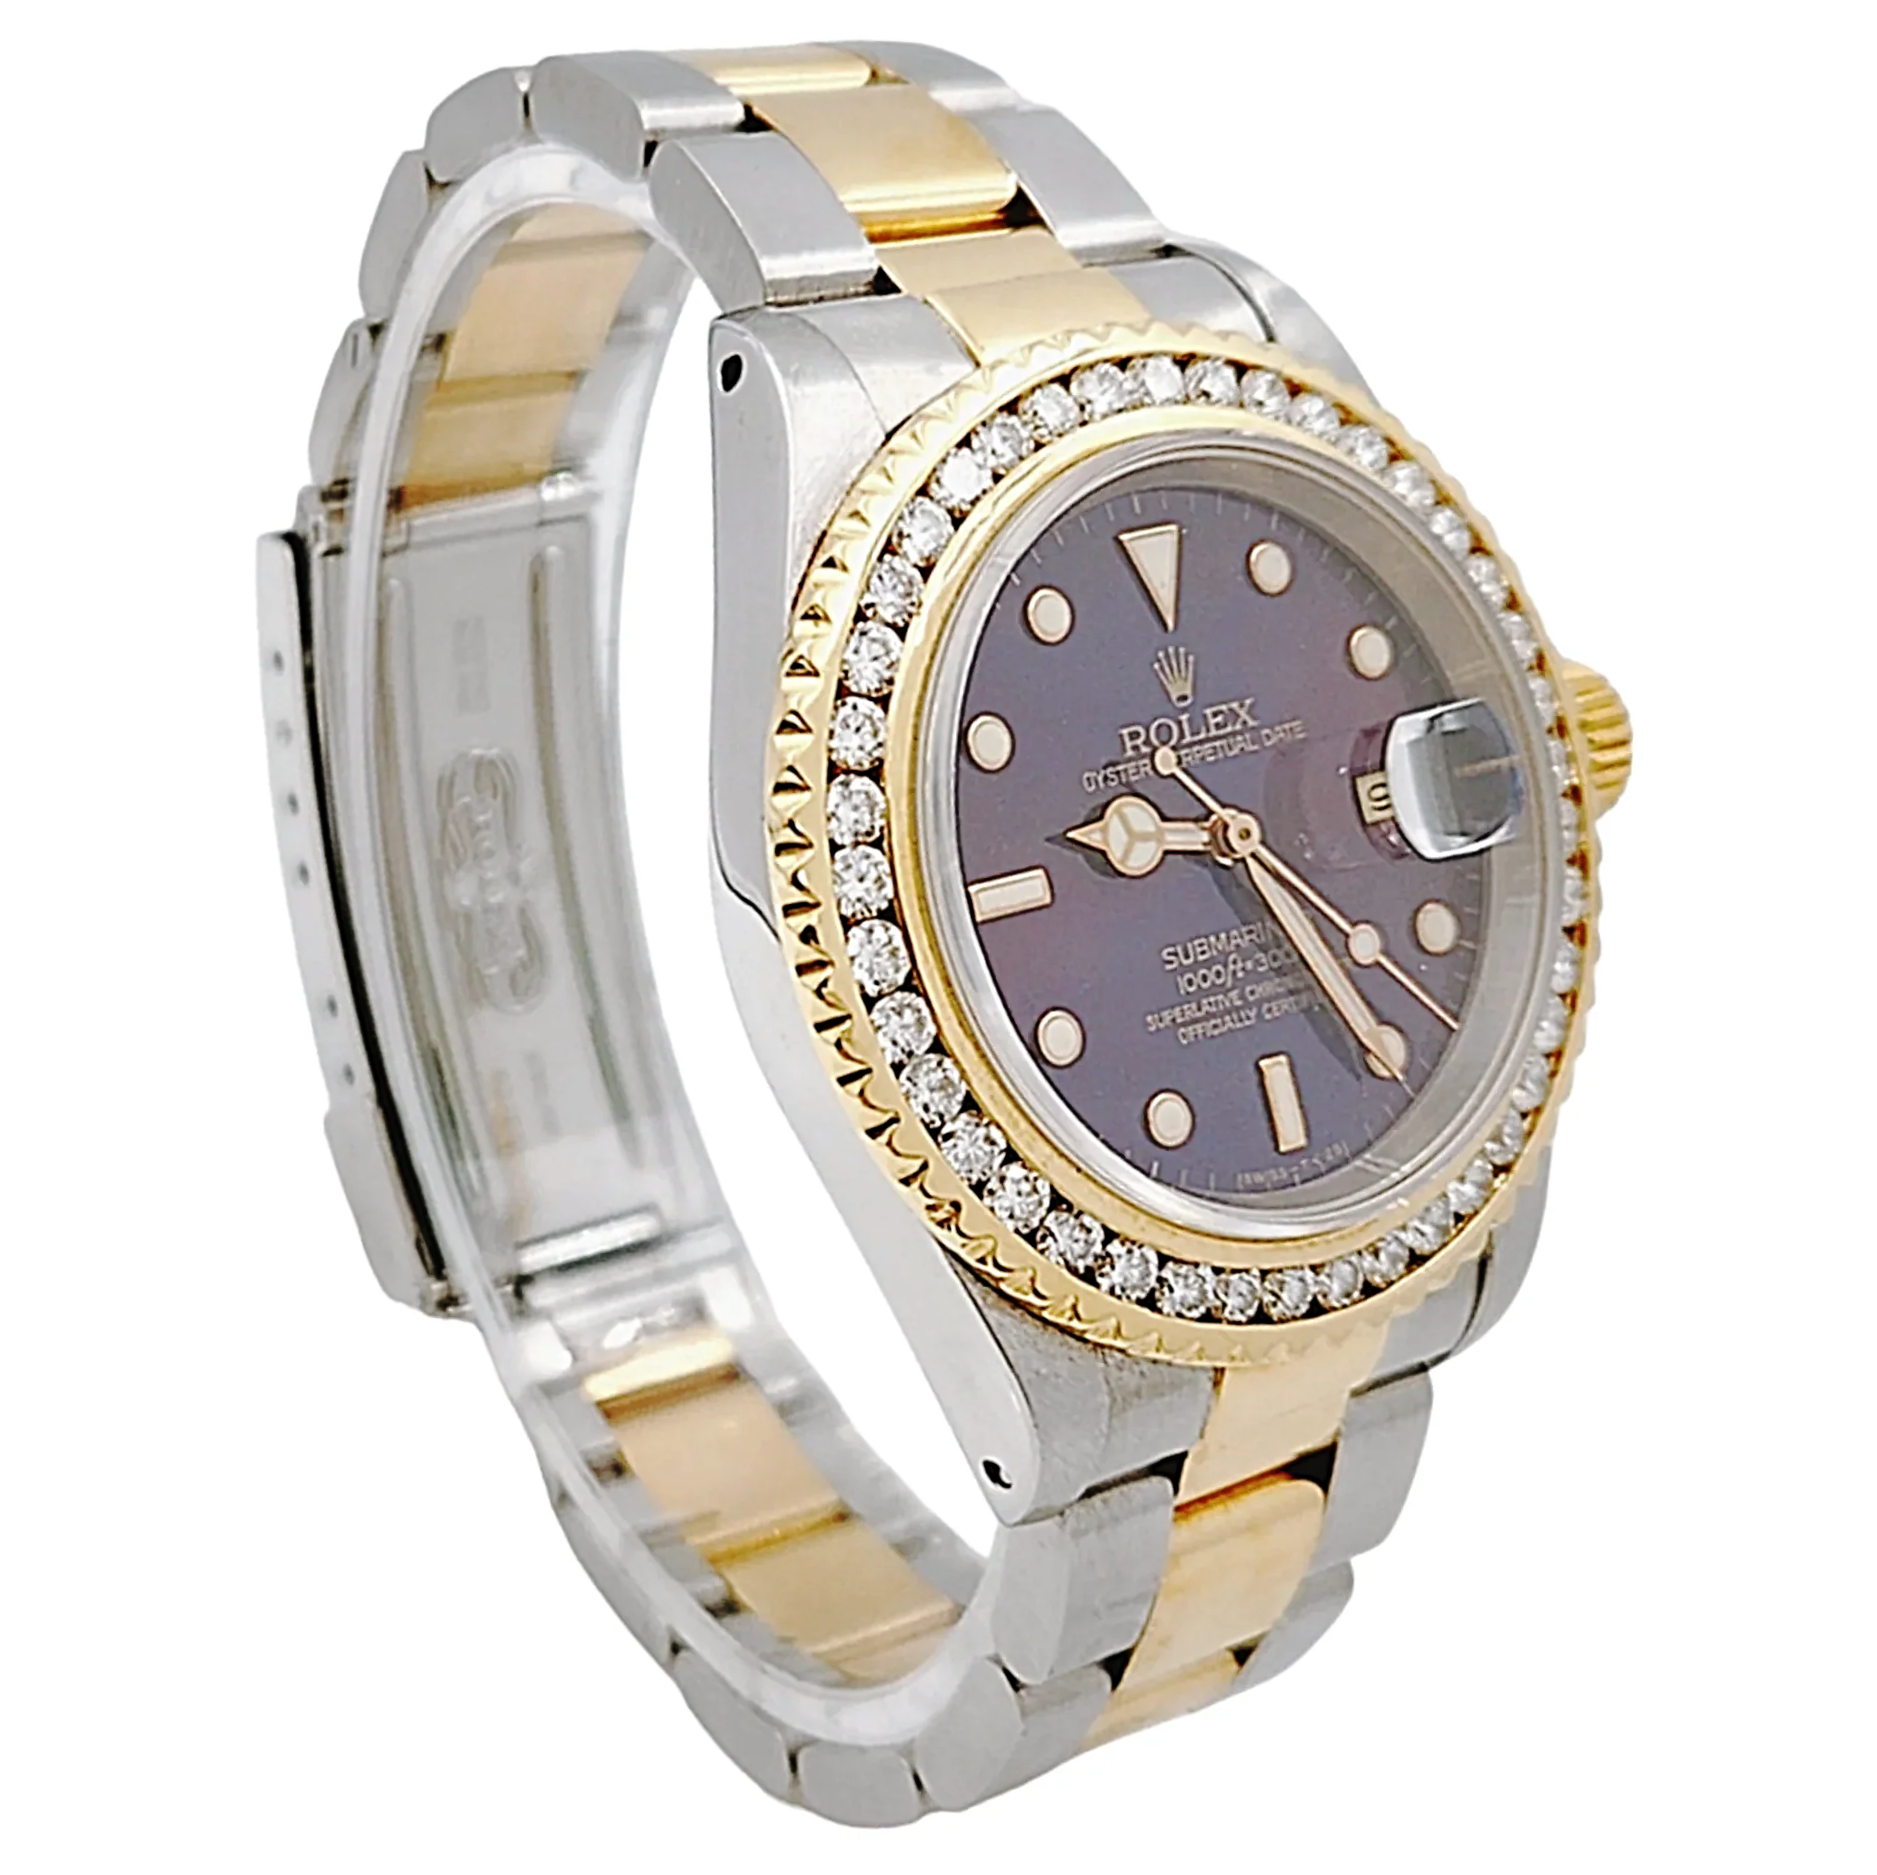 Men's Rolex 40mm Submariner 18K Yellow Gold / Stainless Steel Watch with Blue Dial and 3CT. Diamond Bezel. (Pre-Owned)